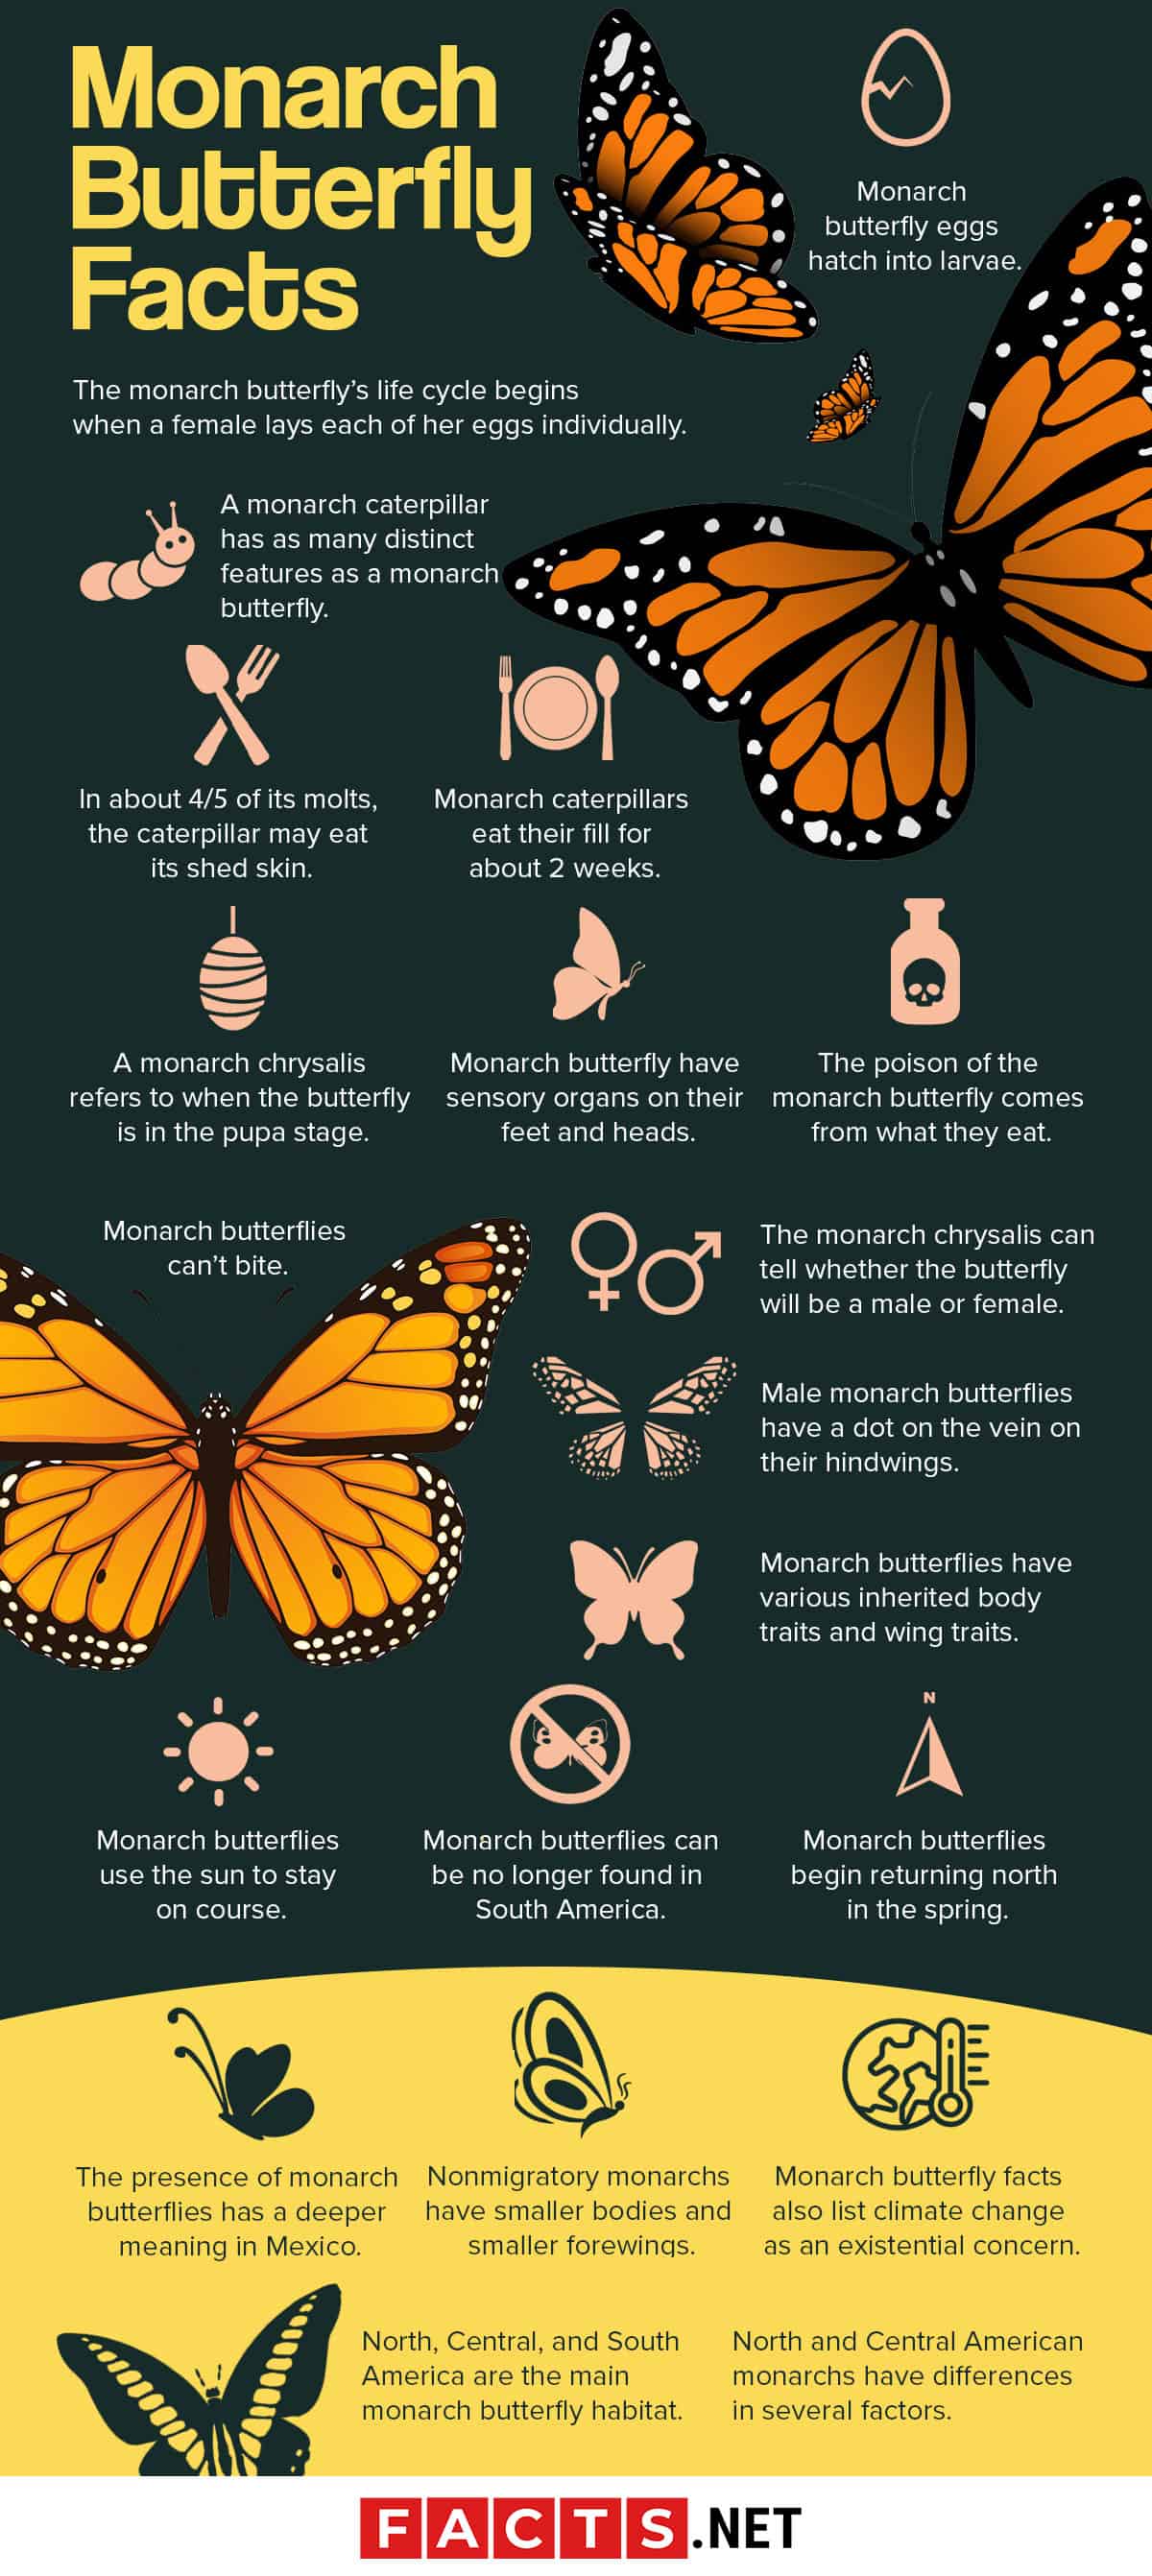 Get The Most Out of butterfly interesting facts and Facebook